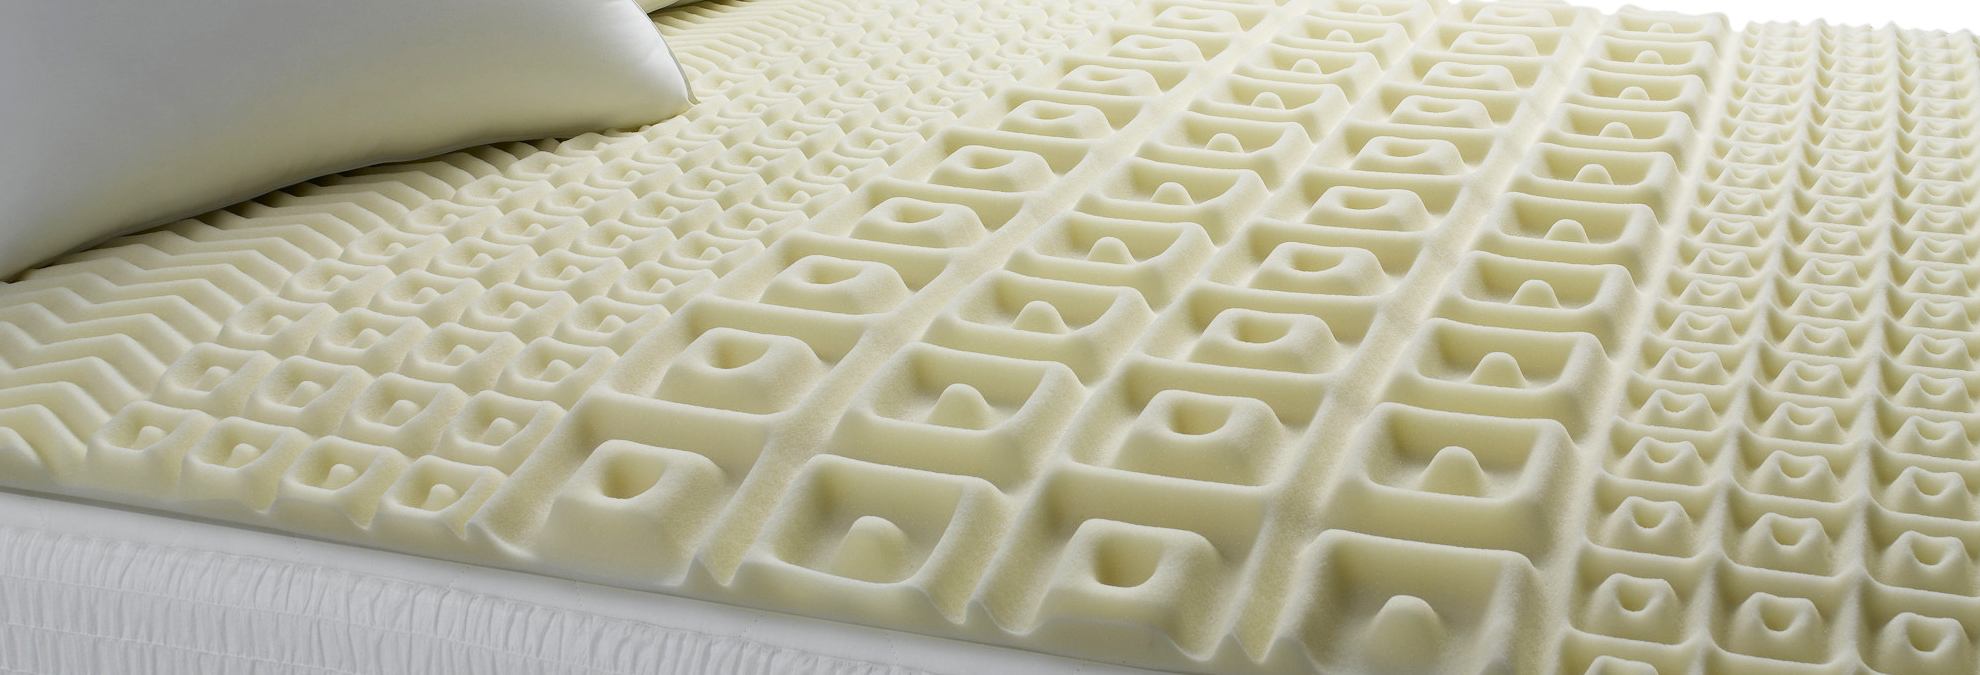 egg crate style mattress topper